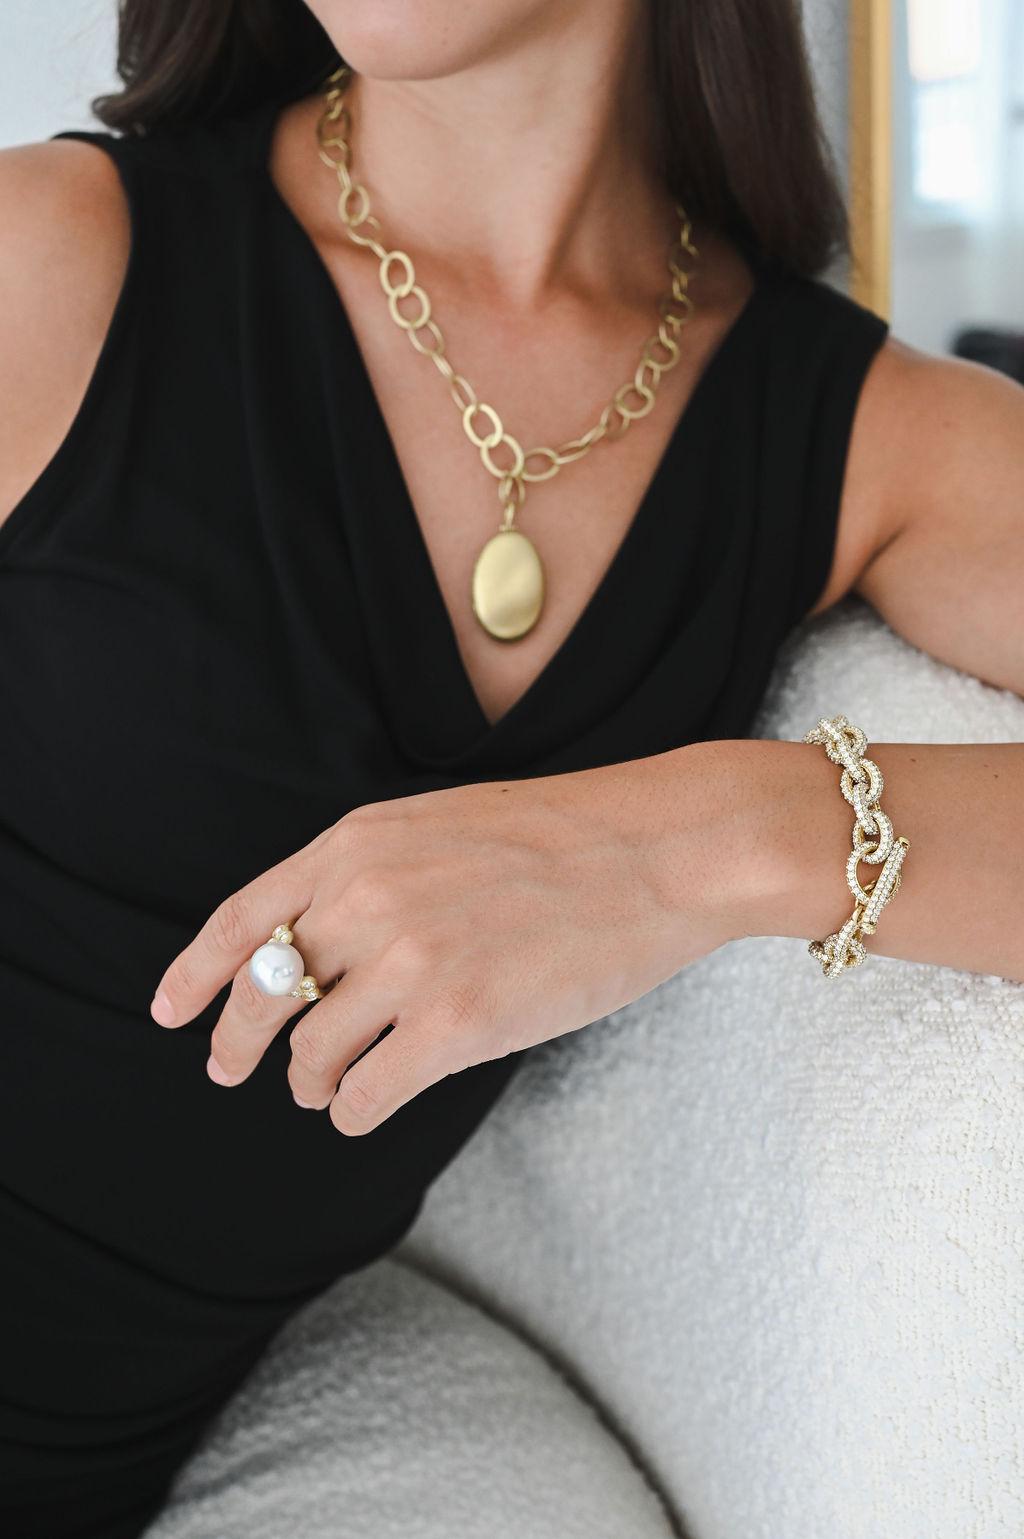 Experience luxury every day in Faye Kim 18 Karat Gold Oval Planished XL Link Chain. The oval planished links with their matte finish gives the piece gorgeous texture and a bold, modern look. 

Chain length: 22